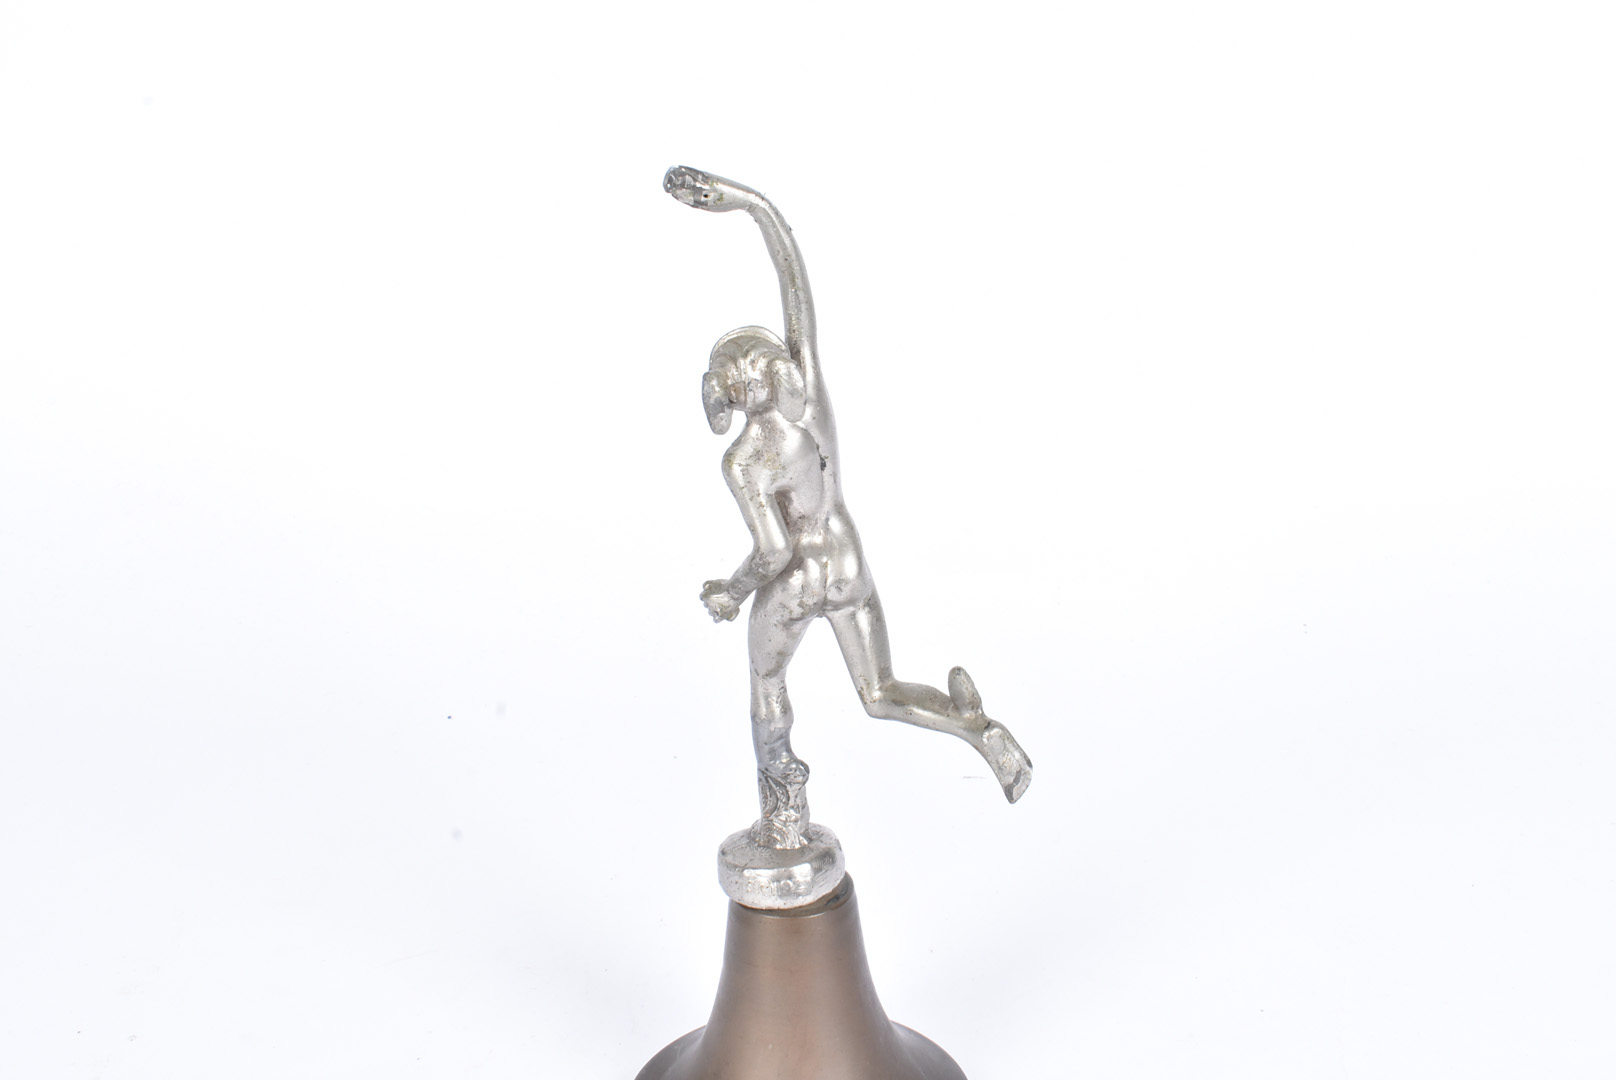 A 1920s Chromed car mascot in the form of Hermes the winged messenger of the Gods, holding the staff - Image 3 of 5